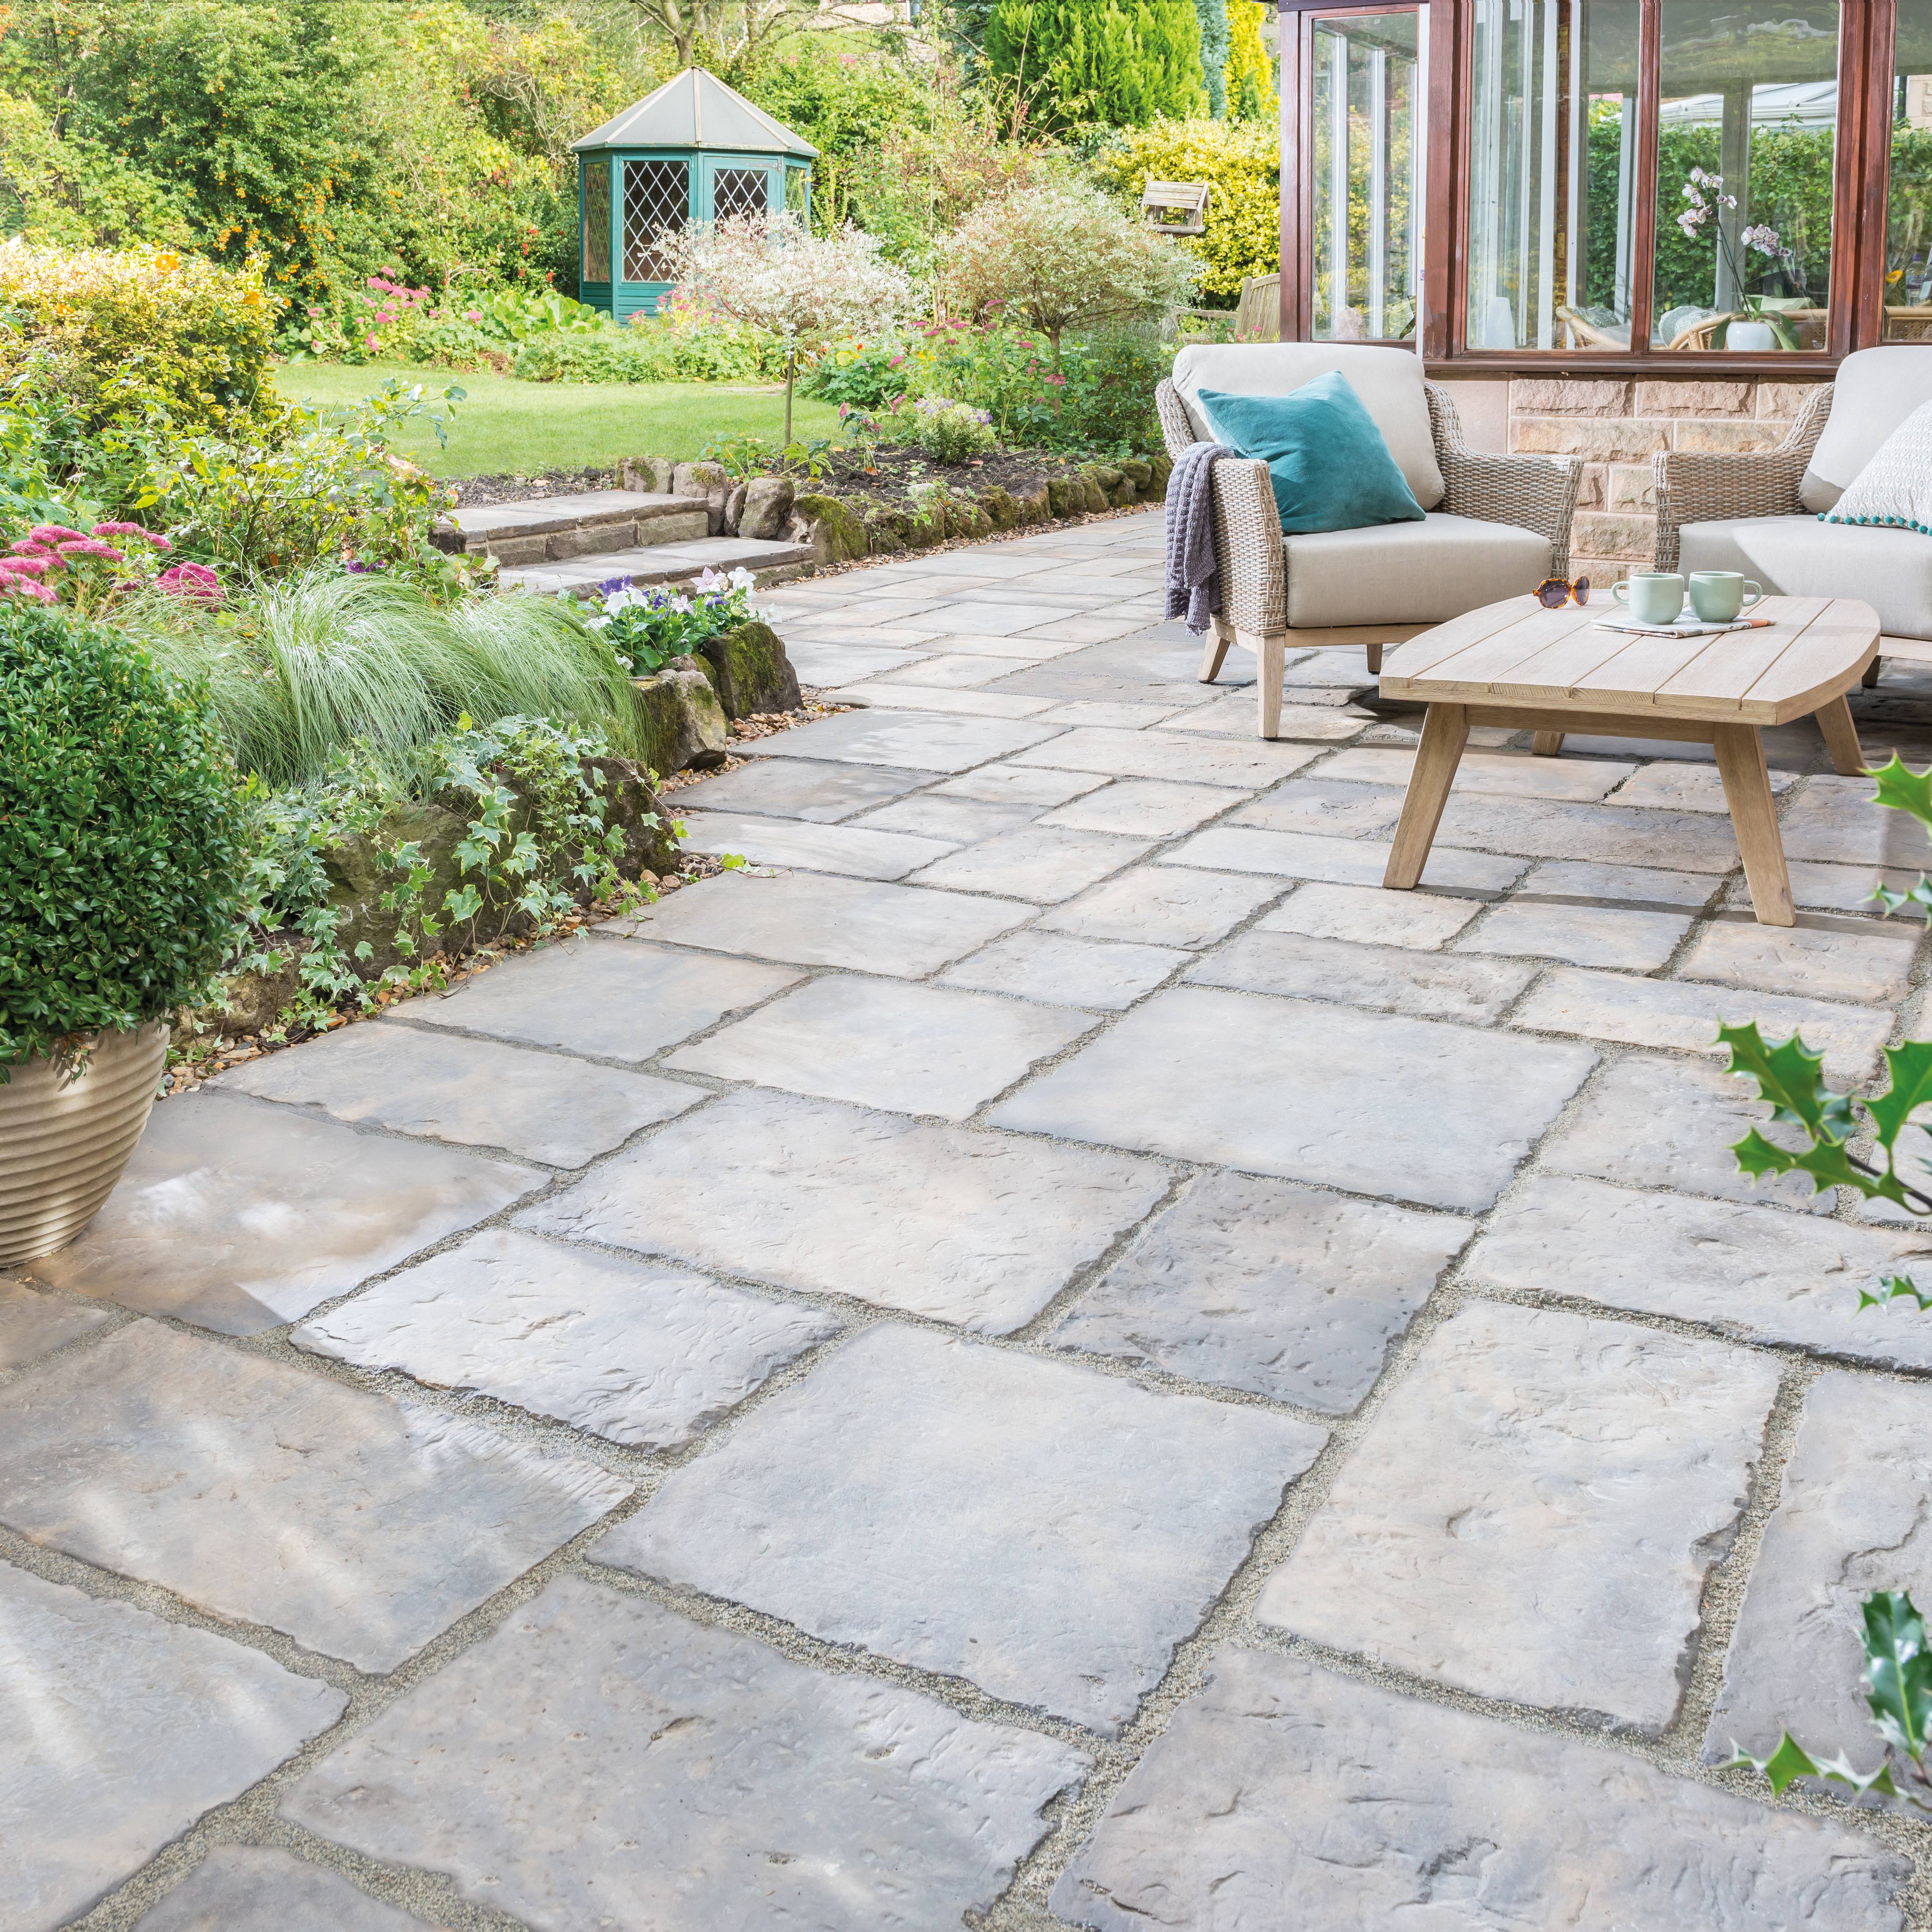 Made from the moulds formed from flooring taken from a derelict 19th century Lancashire Cotton Mill, the Bradstone Old Town Paving Old Quarried gives that random appearance to your patio. Perfect for a traditional outdoor space.